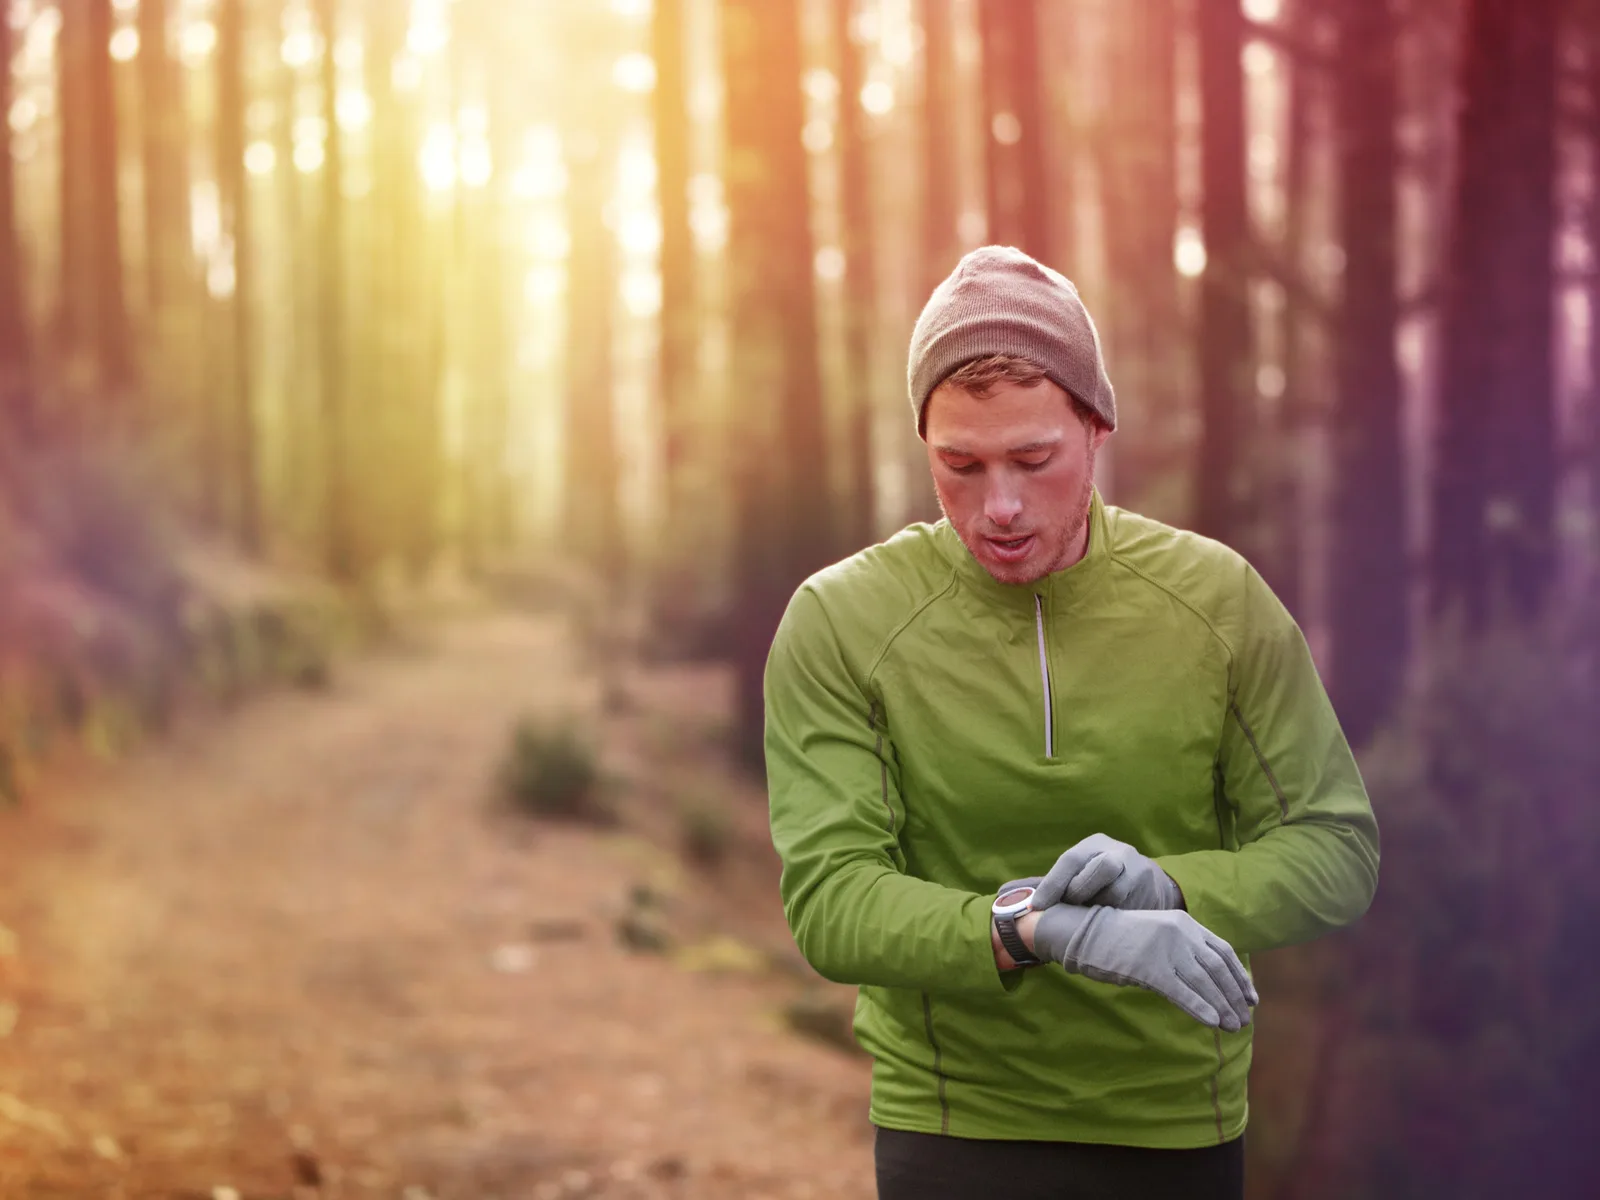 For a piece on the best outdoor watches, a guy looks at his wrist while wearing running gear in the forest